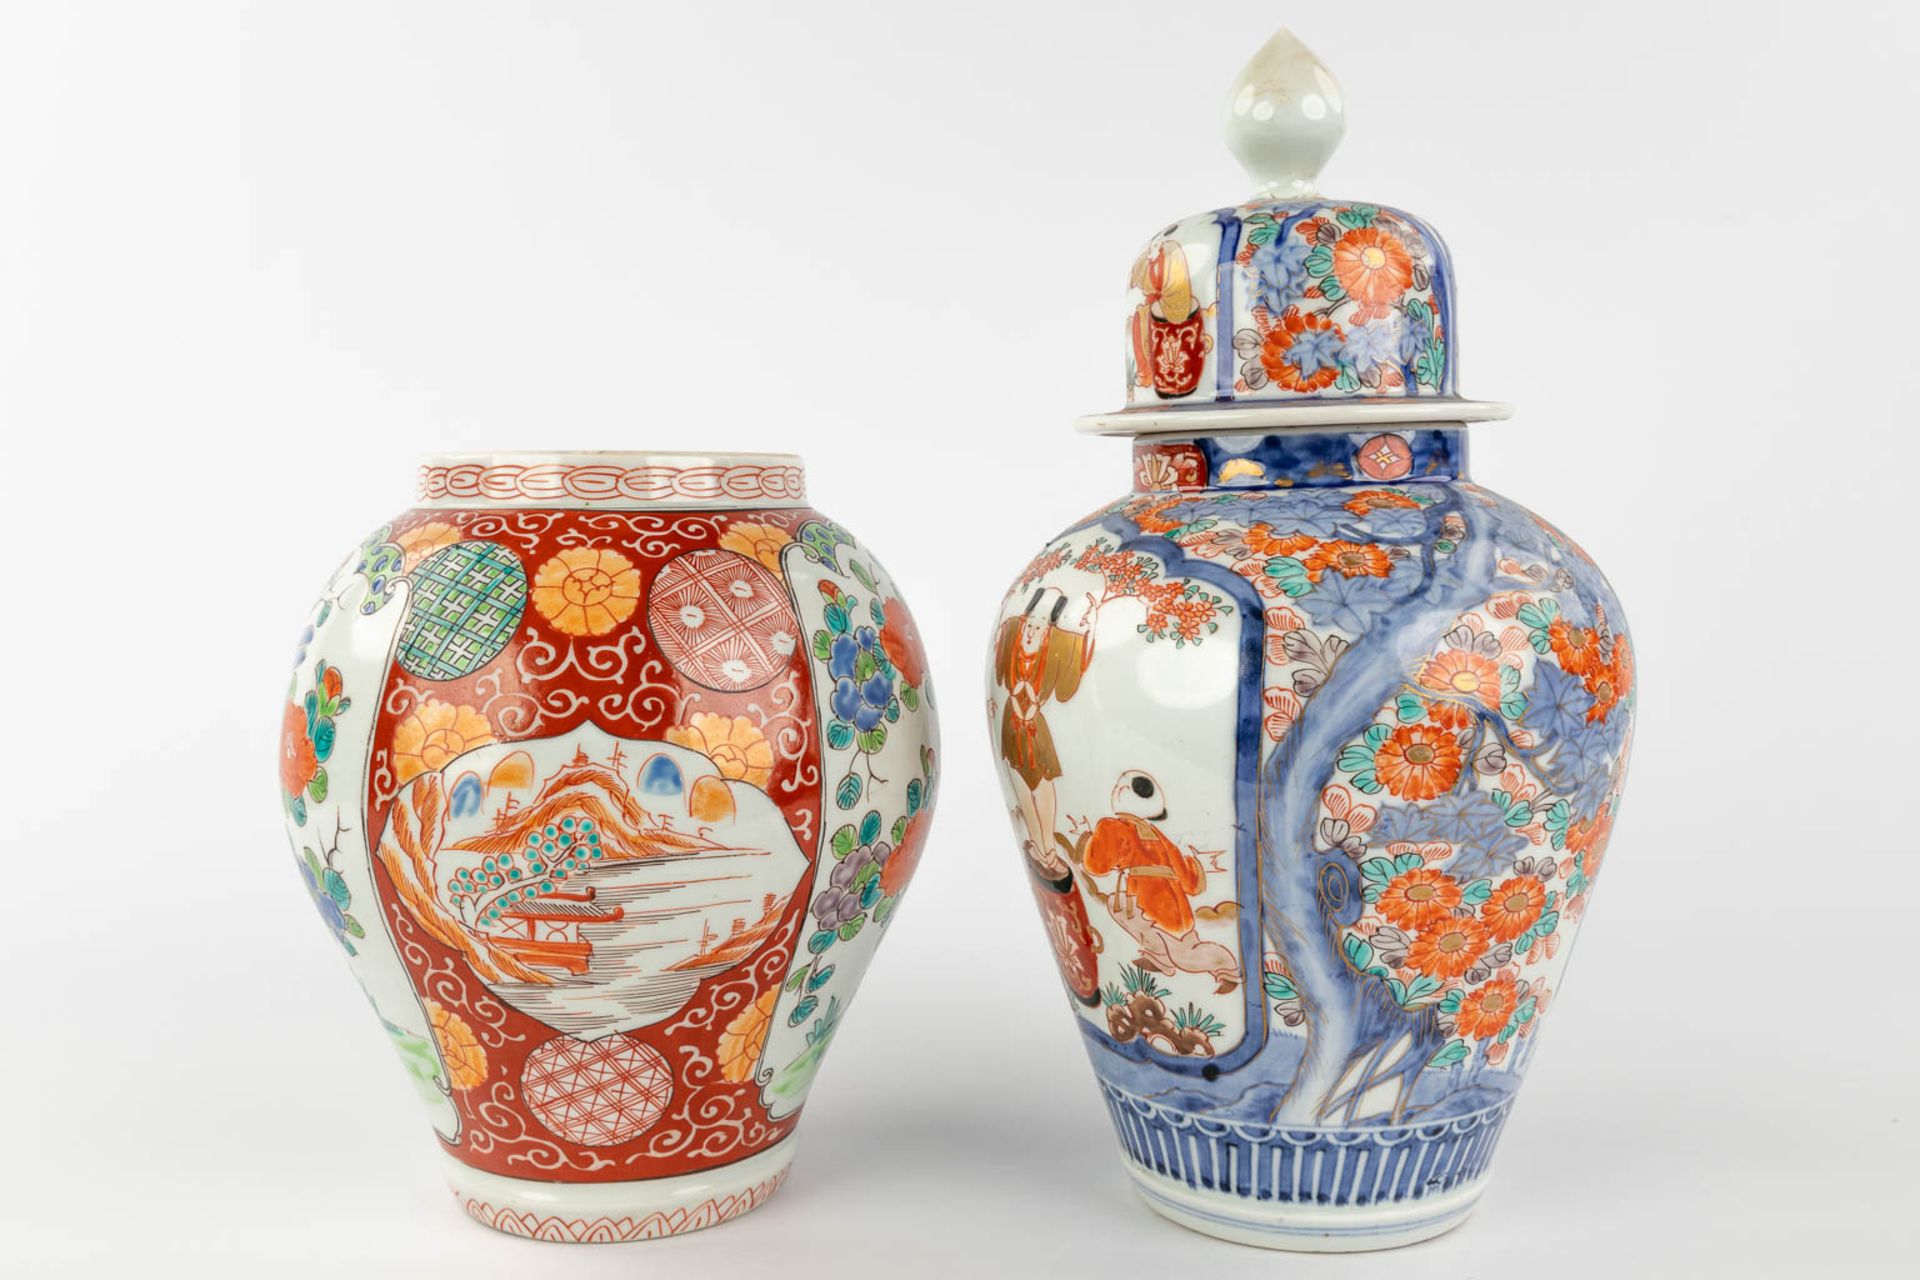 An assembled collection of Japanese Imari and Kutani porcelain. 19th/20th century. (H: 35 x D: 19 cm - Image 13 of 22